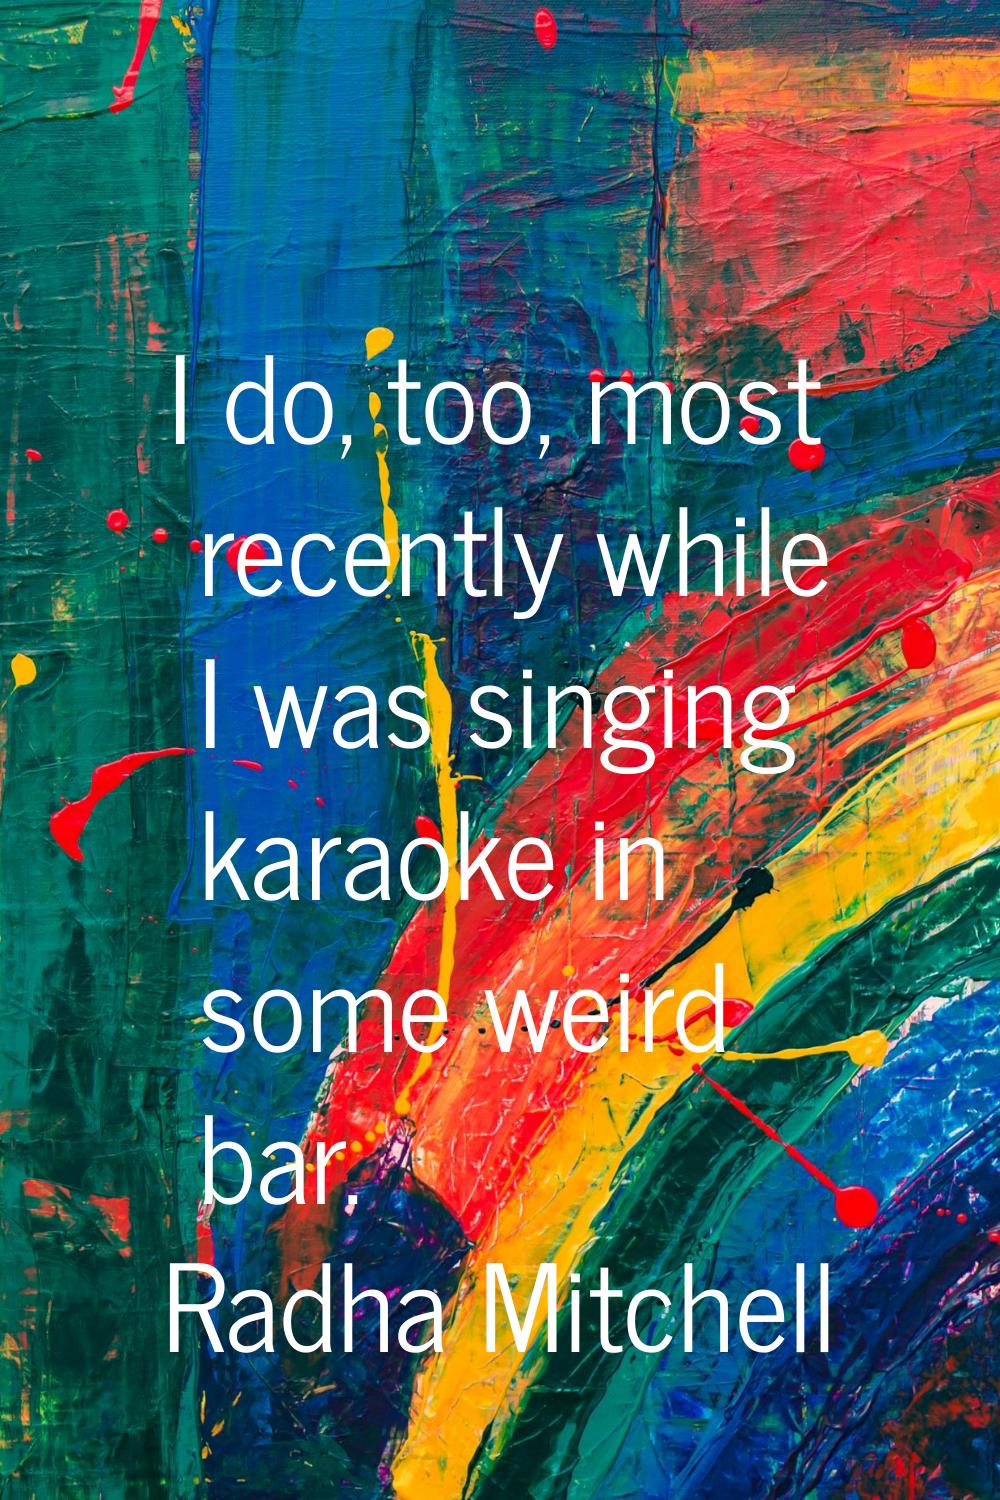 I do, too, most recently while I was singing karaoke in some weird bar.